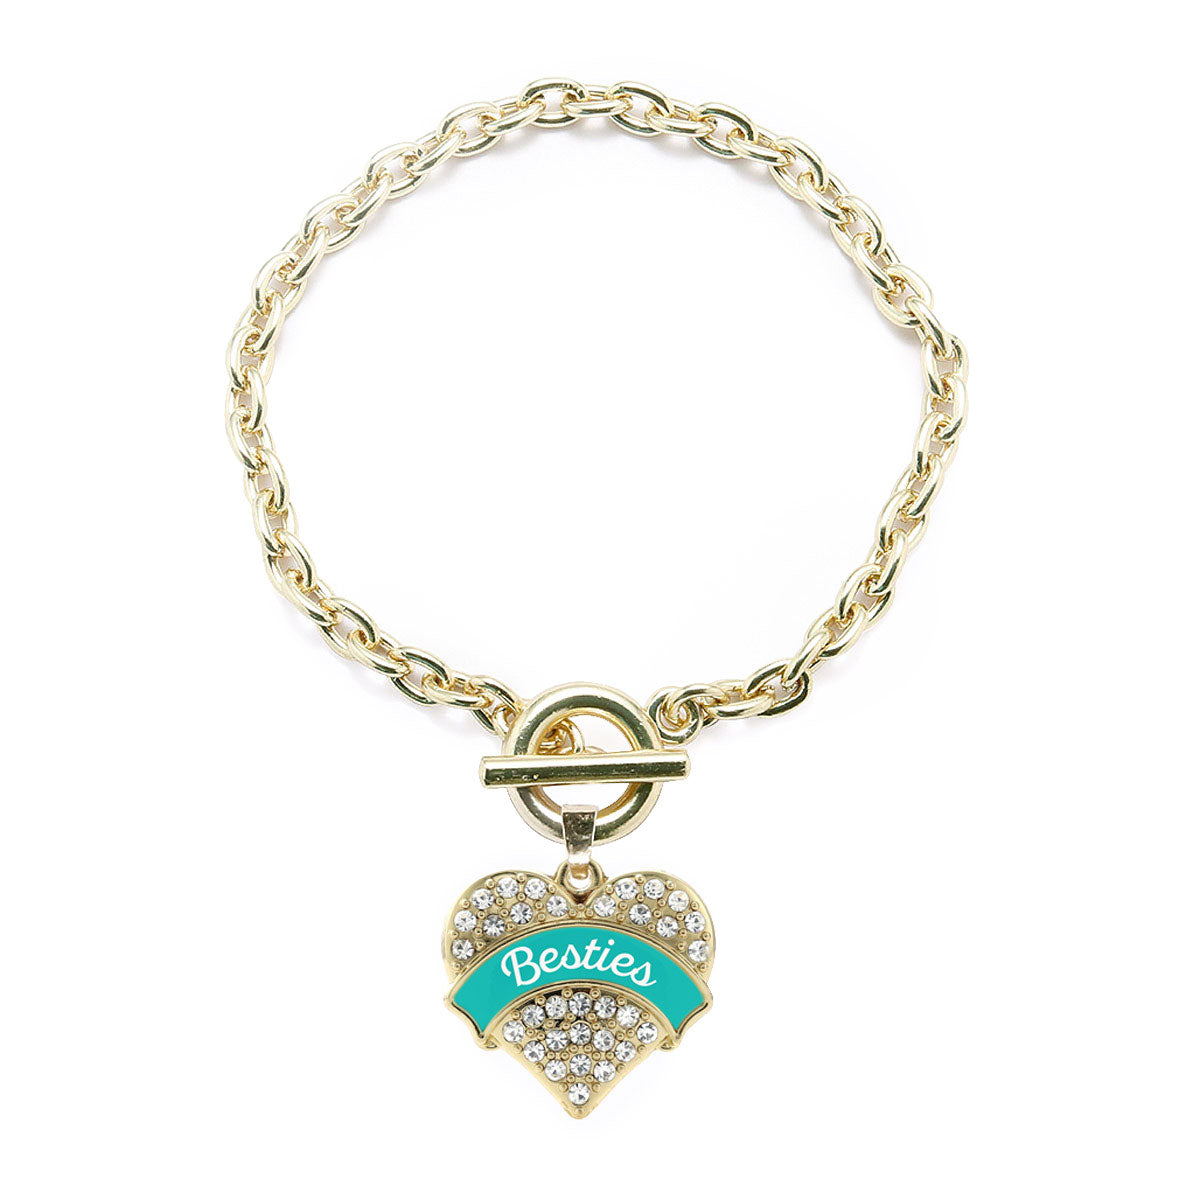 Gold Teal Besties Pave Heart Charm Toggle Bracelet